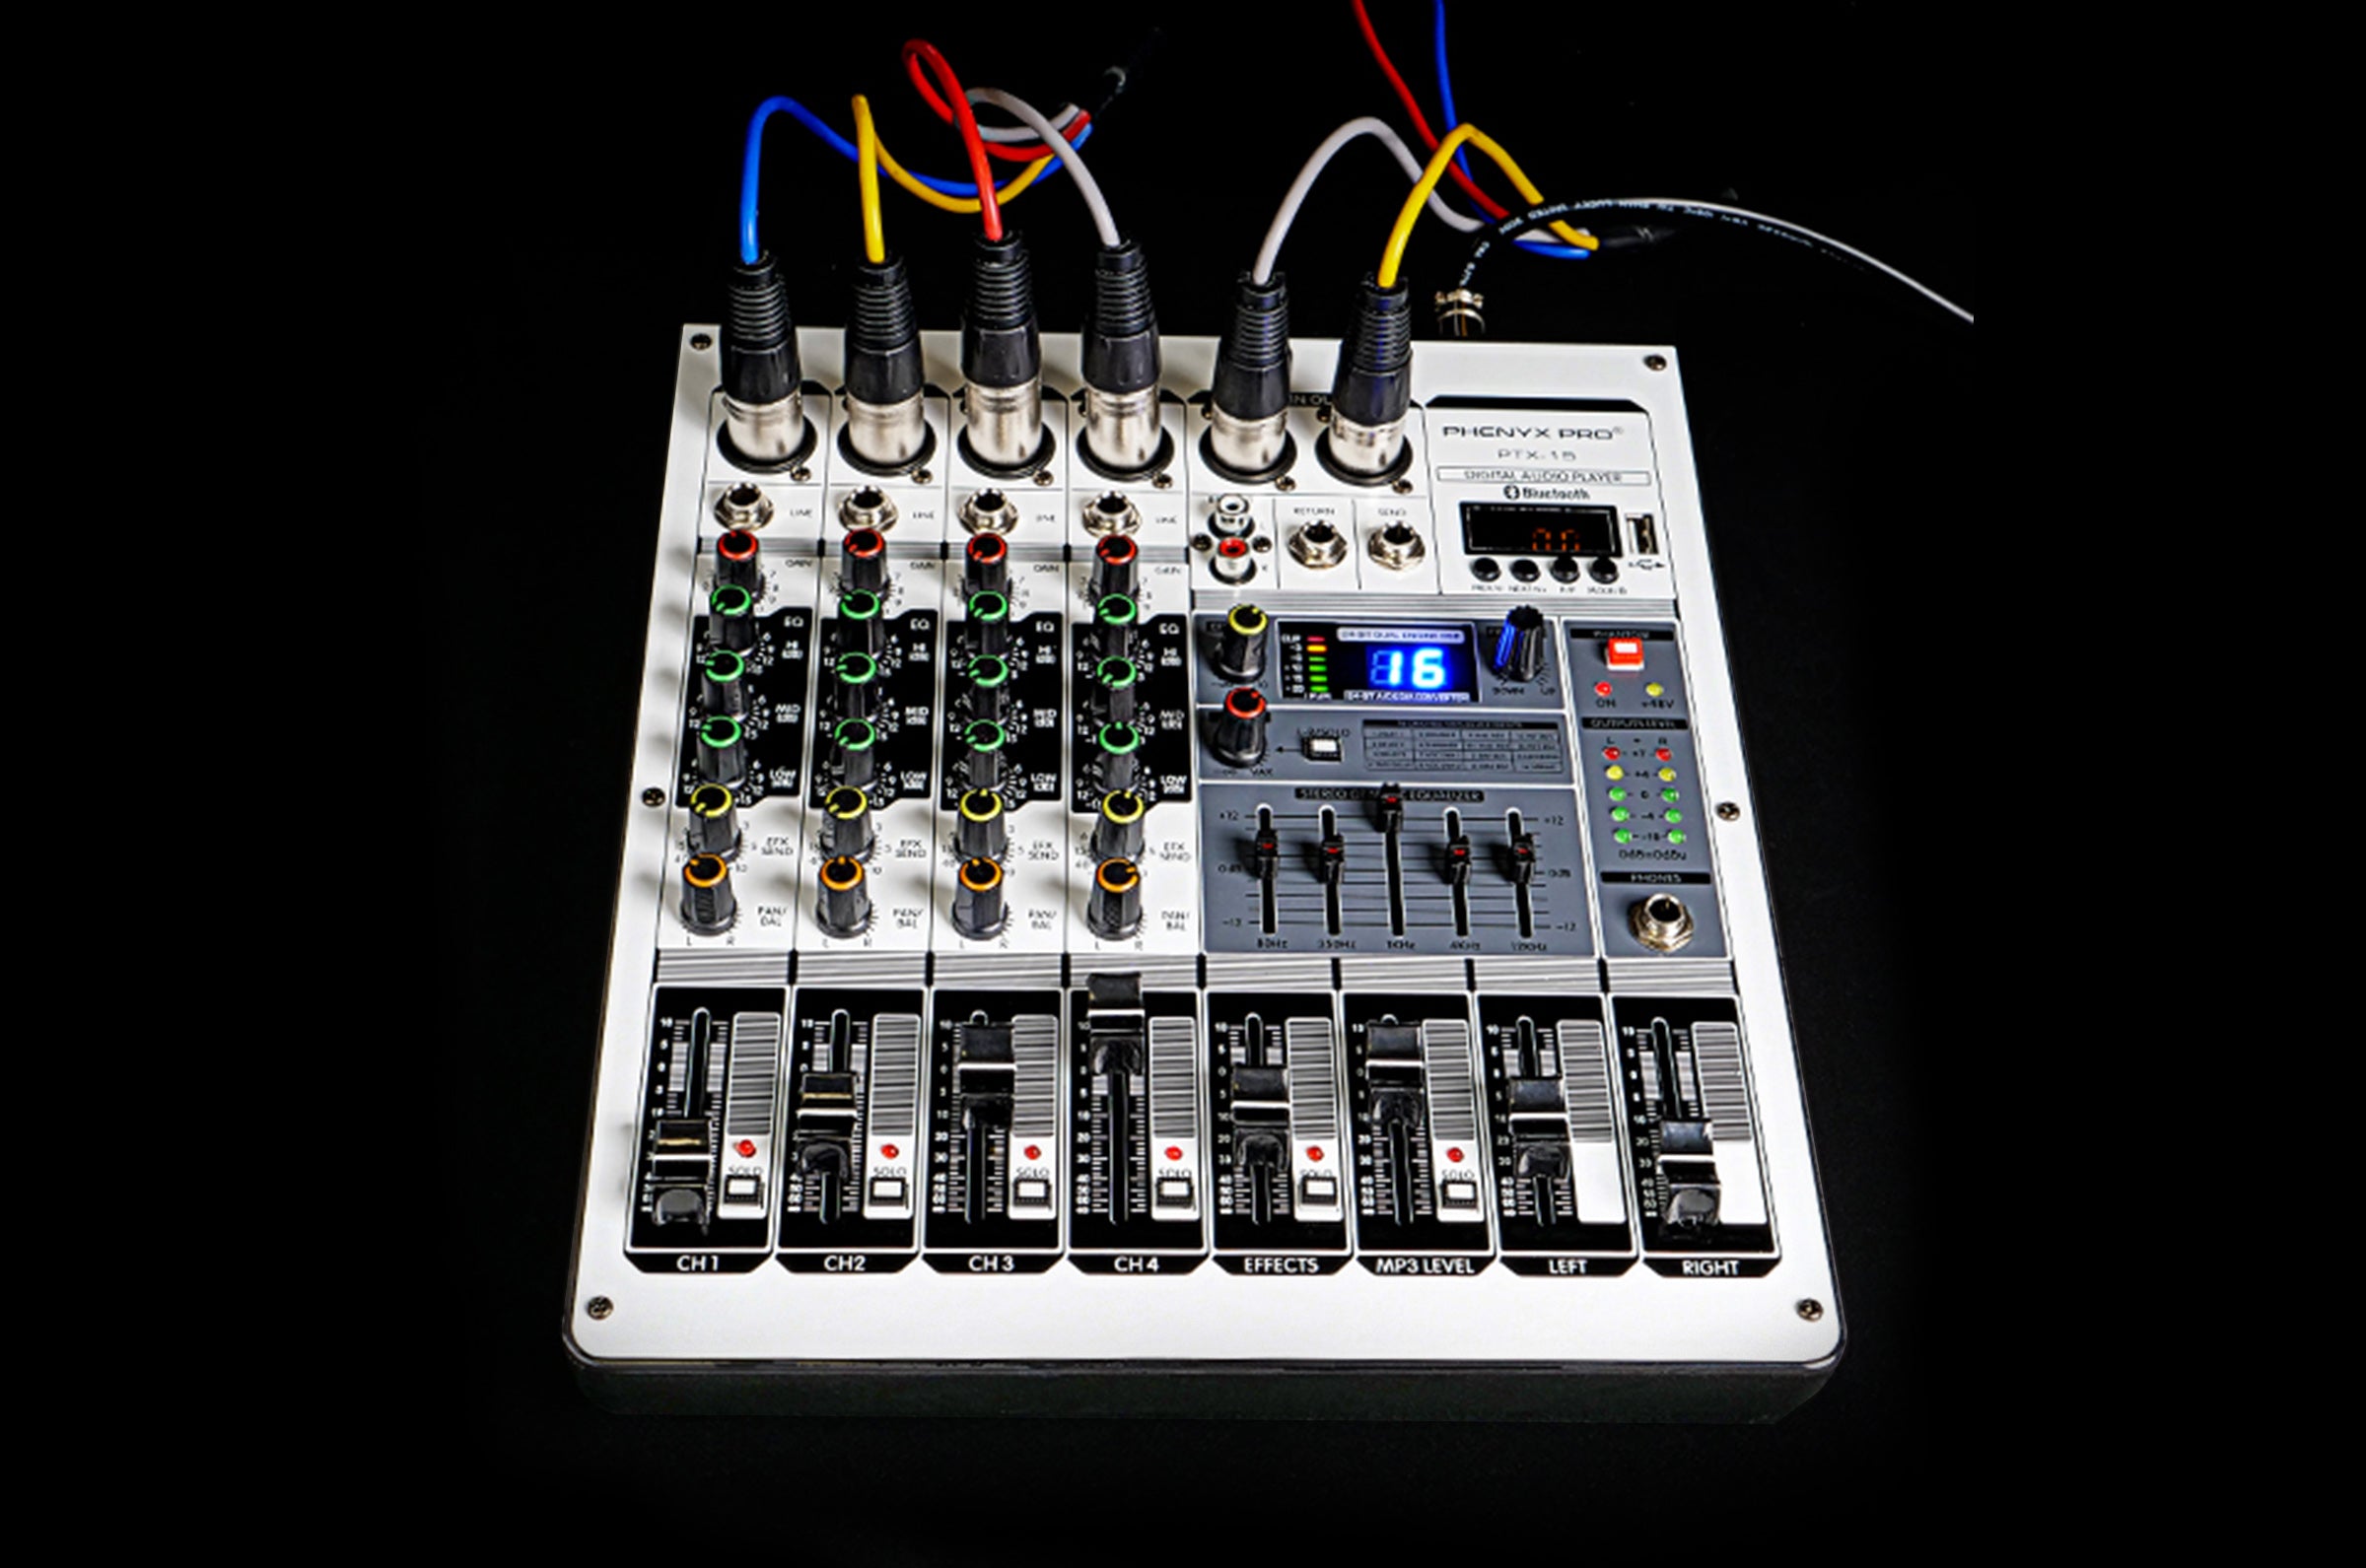 How to Use Bluetooth Function for the PTX-15 Mixer